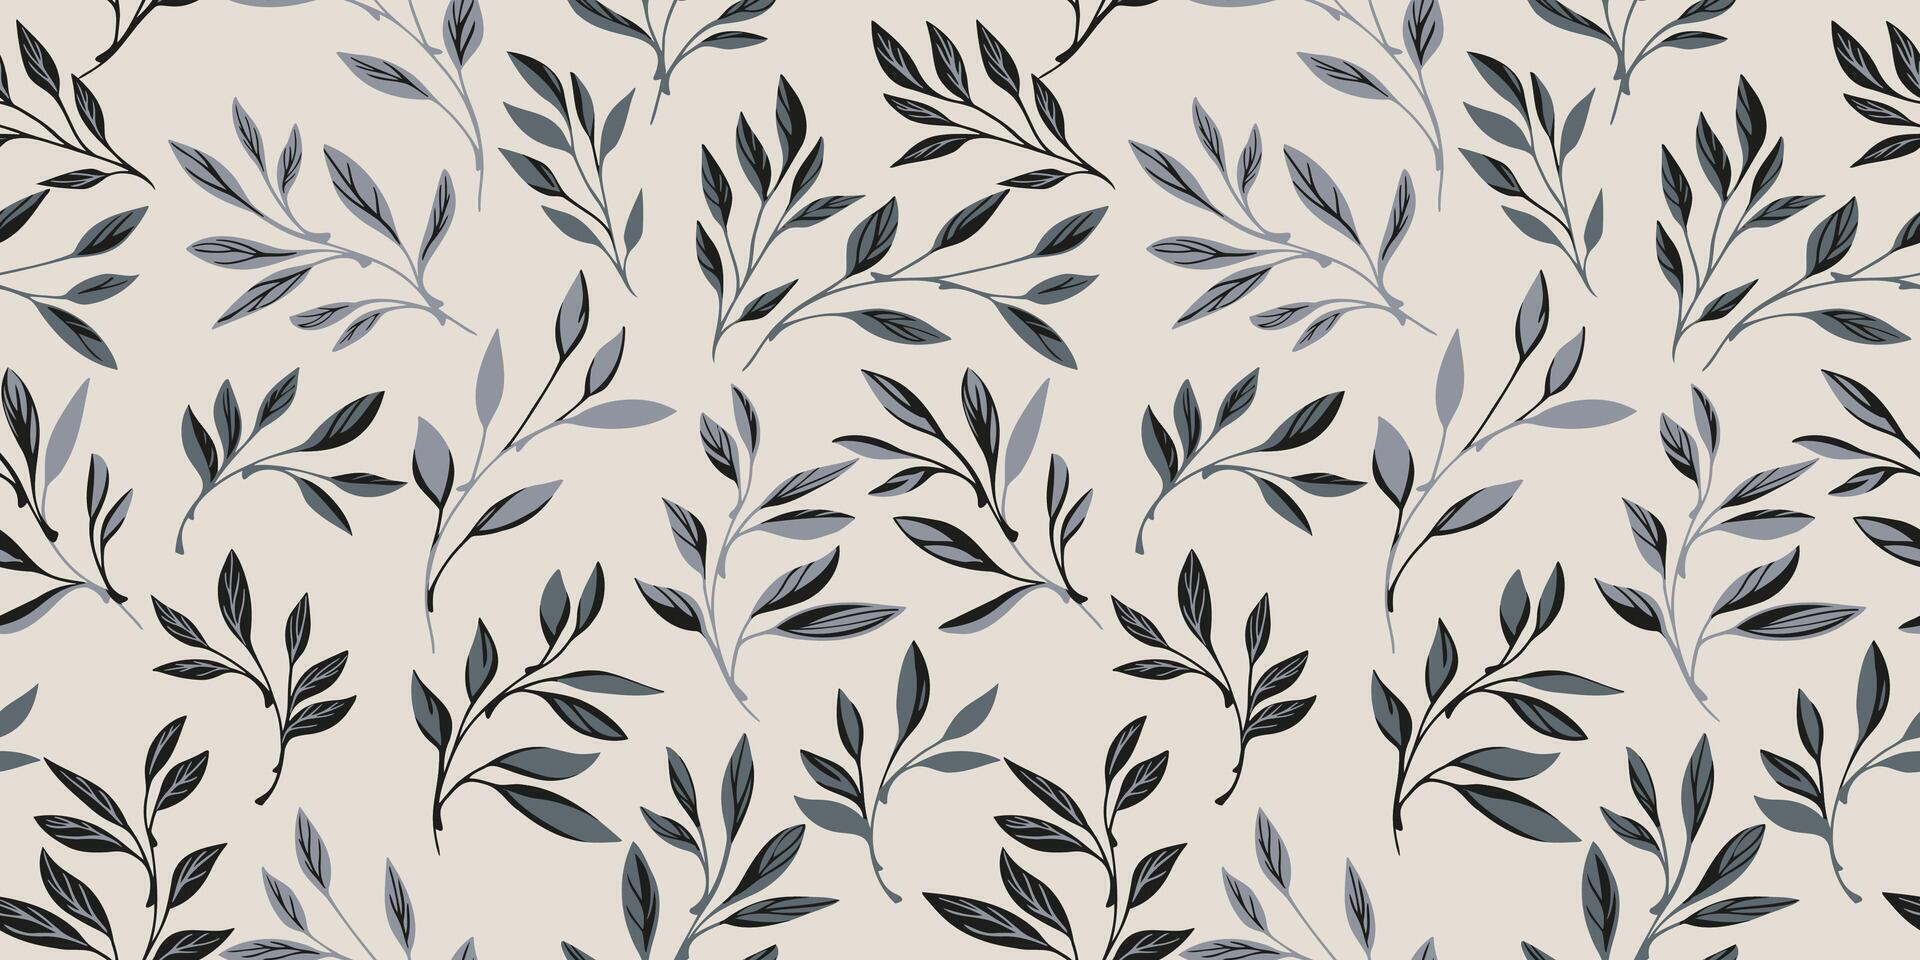 Abstract, artistic tiny leaves stems tiny seamless pattern. Elegance grey leaf branches printing. Nature botanical patterned. hand drawn. Template for designs, collage vector